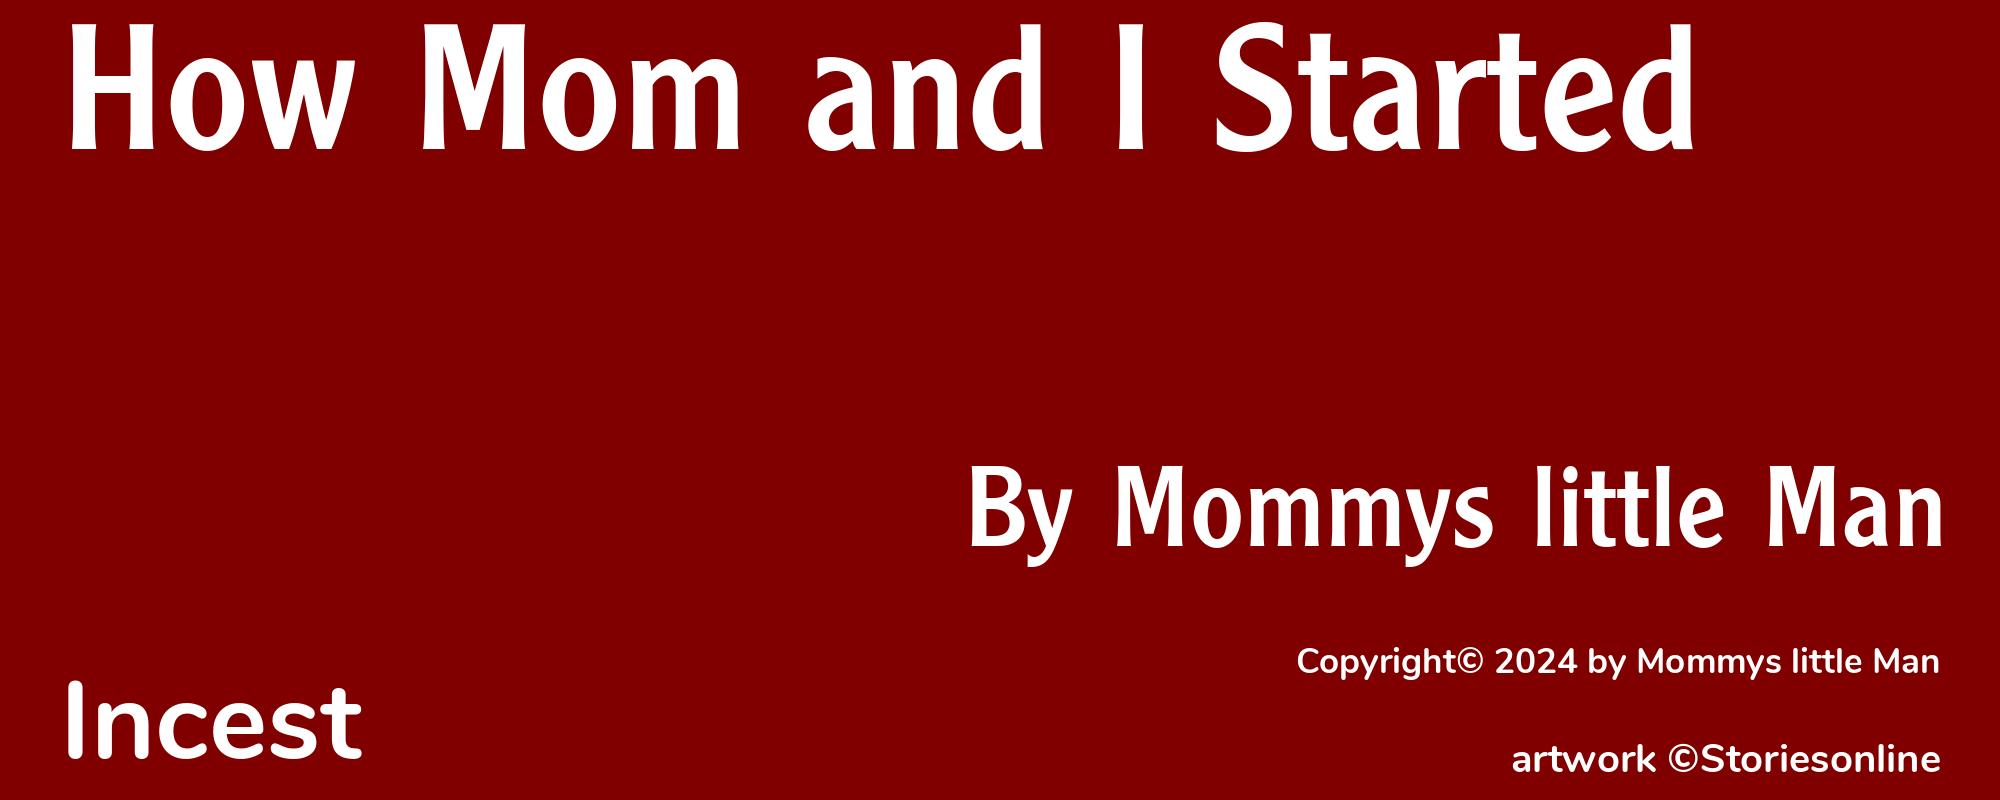 How Mom and I Started - Cover